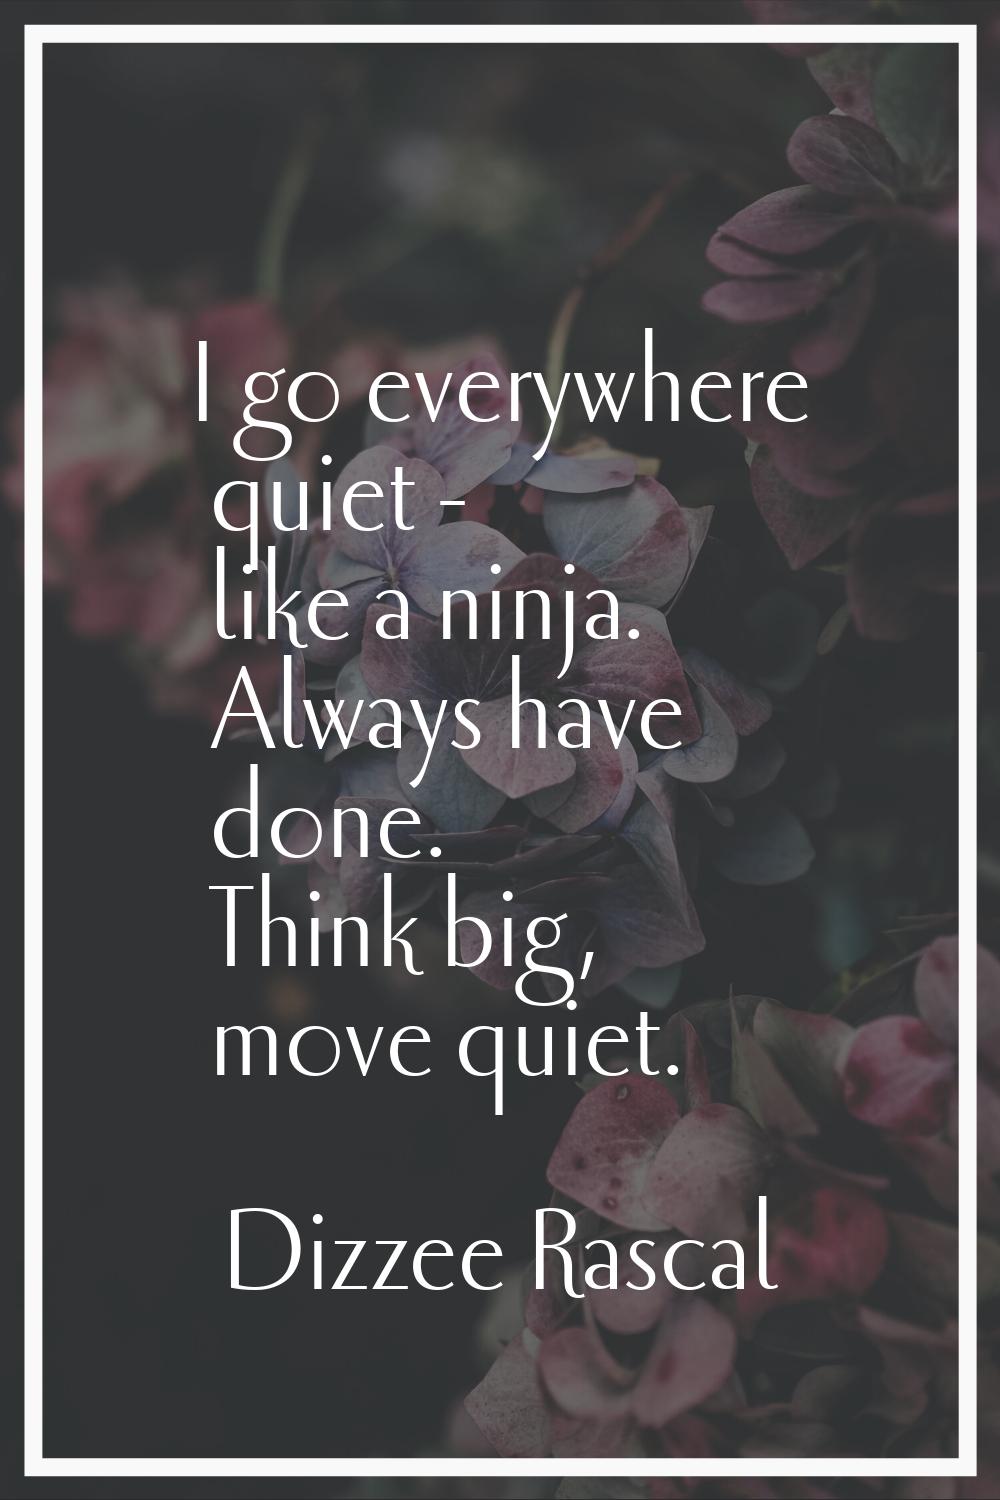 I go everywhere quiet - like a ninja. Always have done. Think big, move quiet.